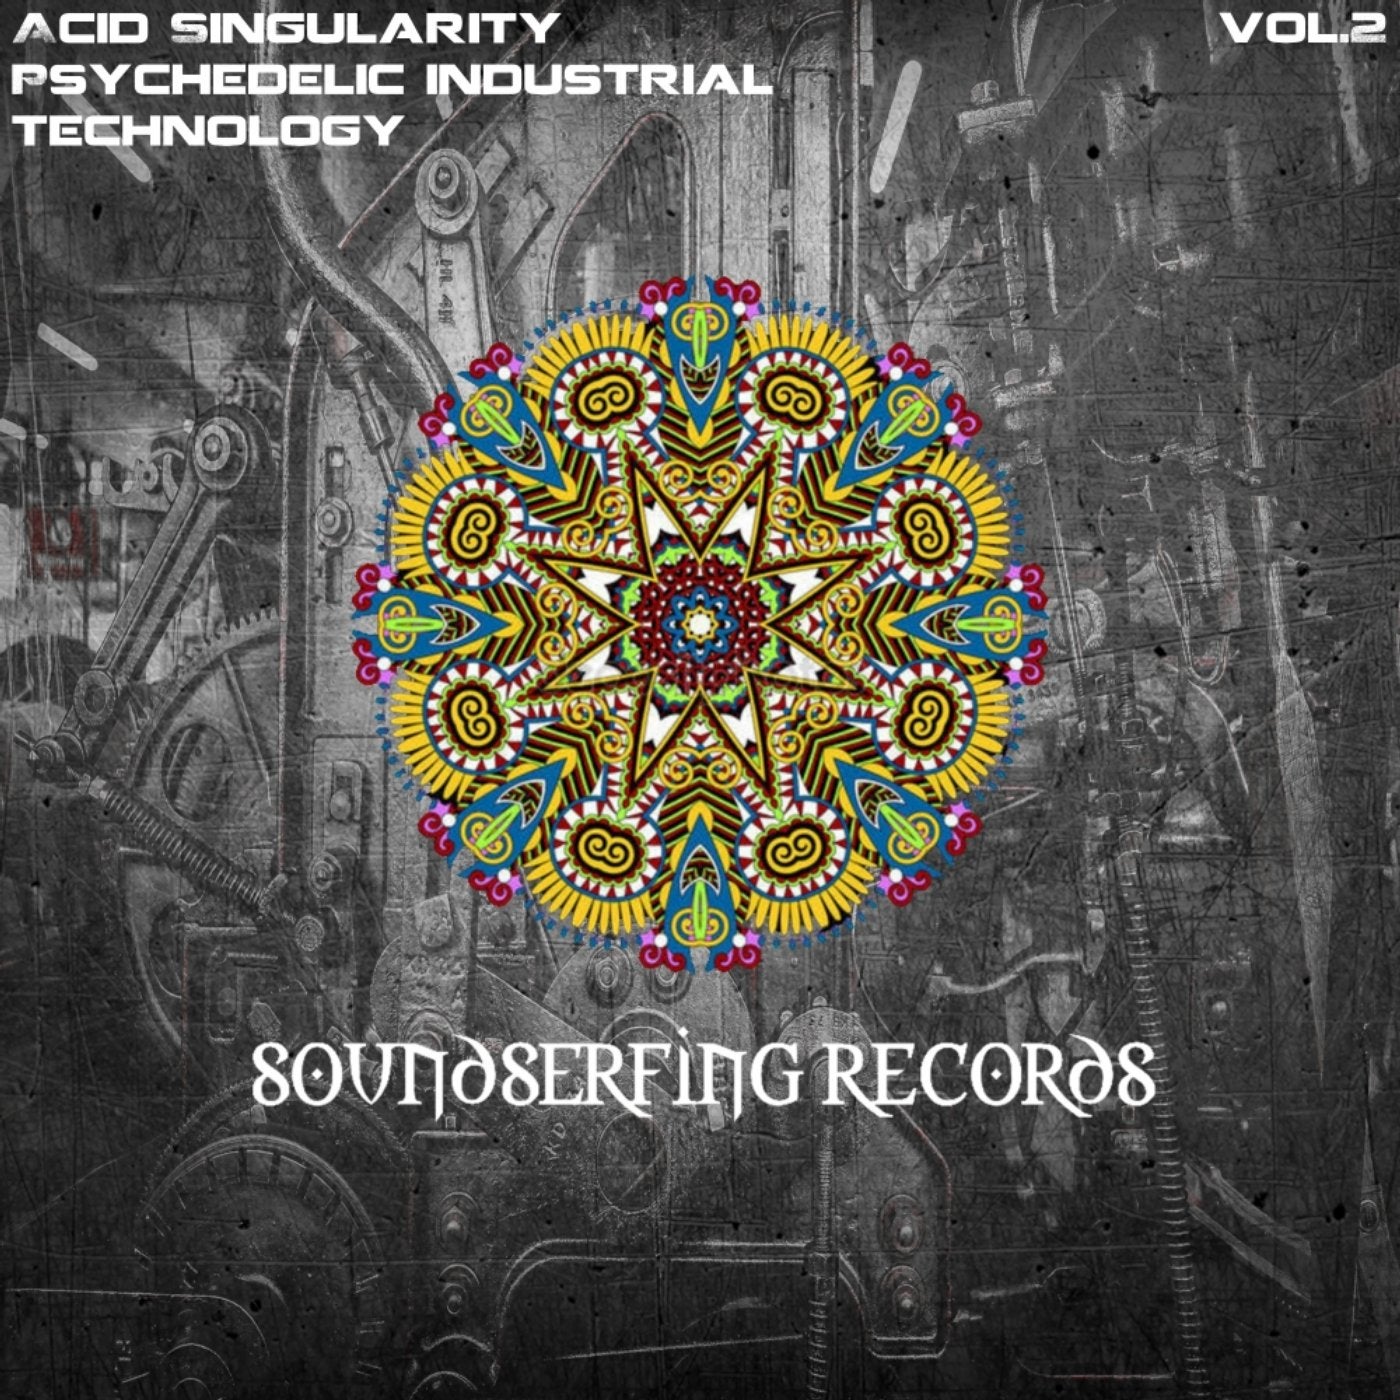 Psychedelic Industrial Technology, Vol. 2